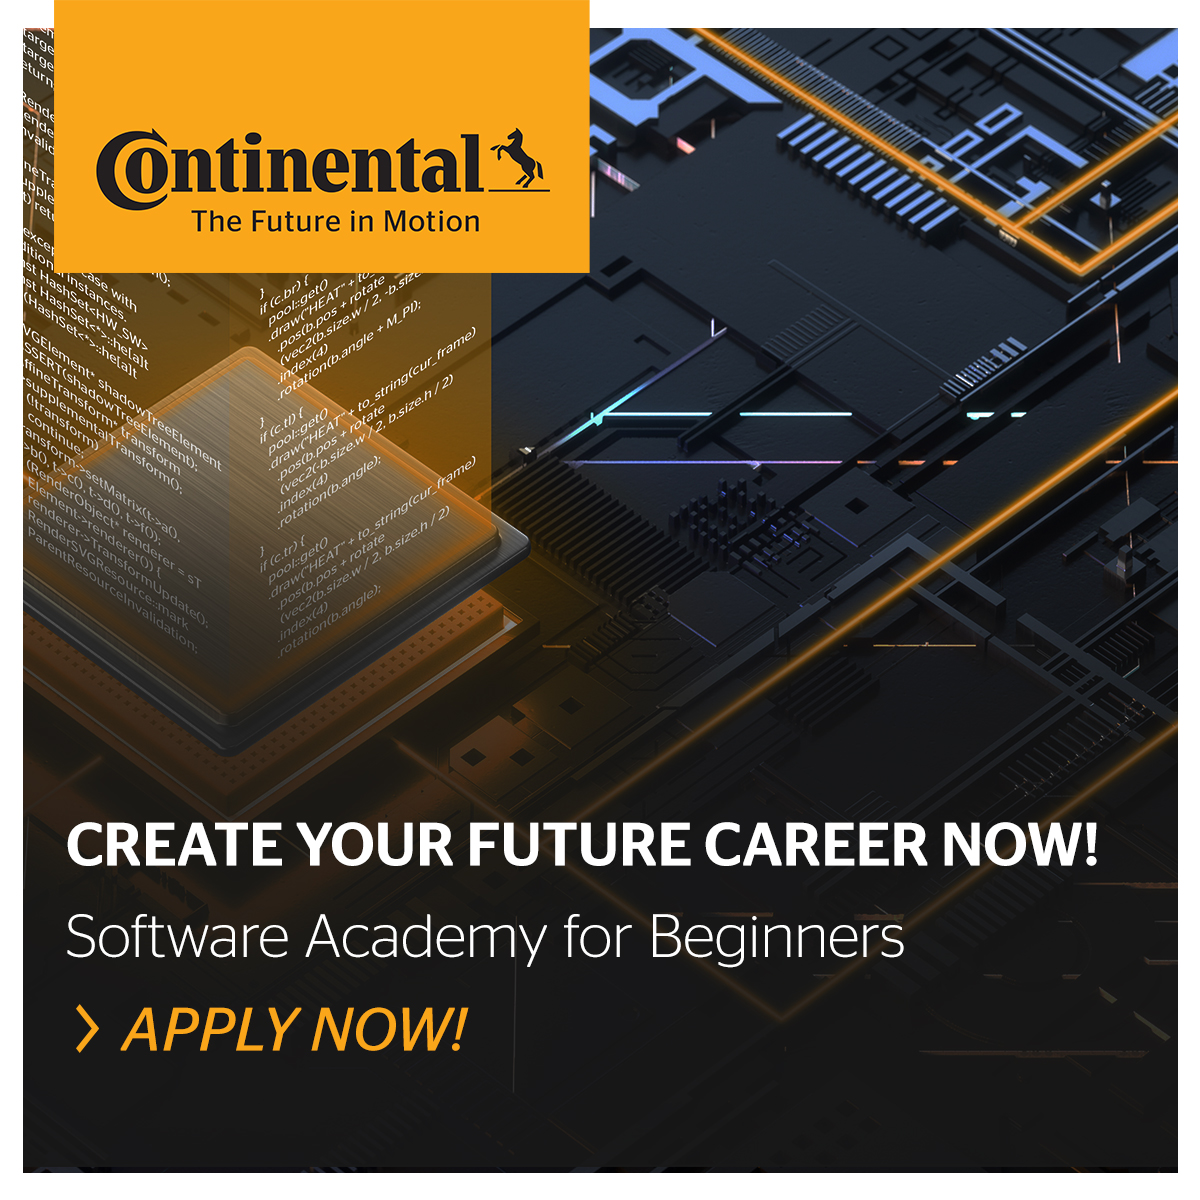 Software Academy for Beginners – in parteneriat cu Continental Systems